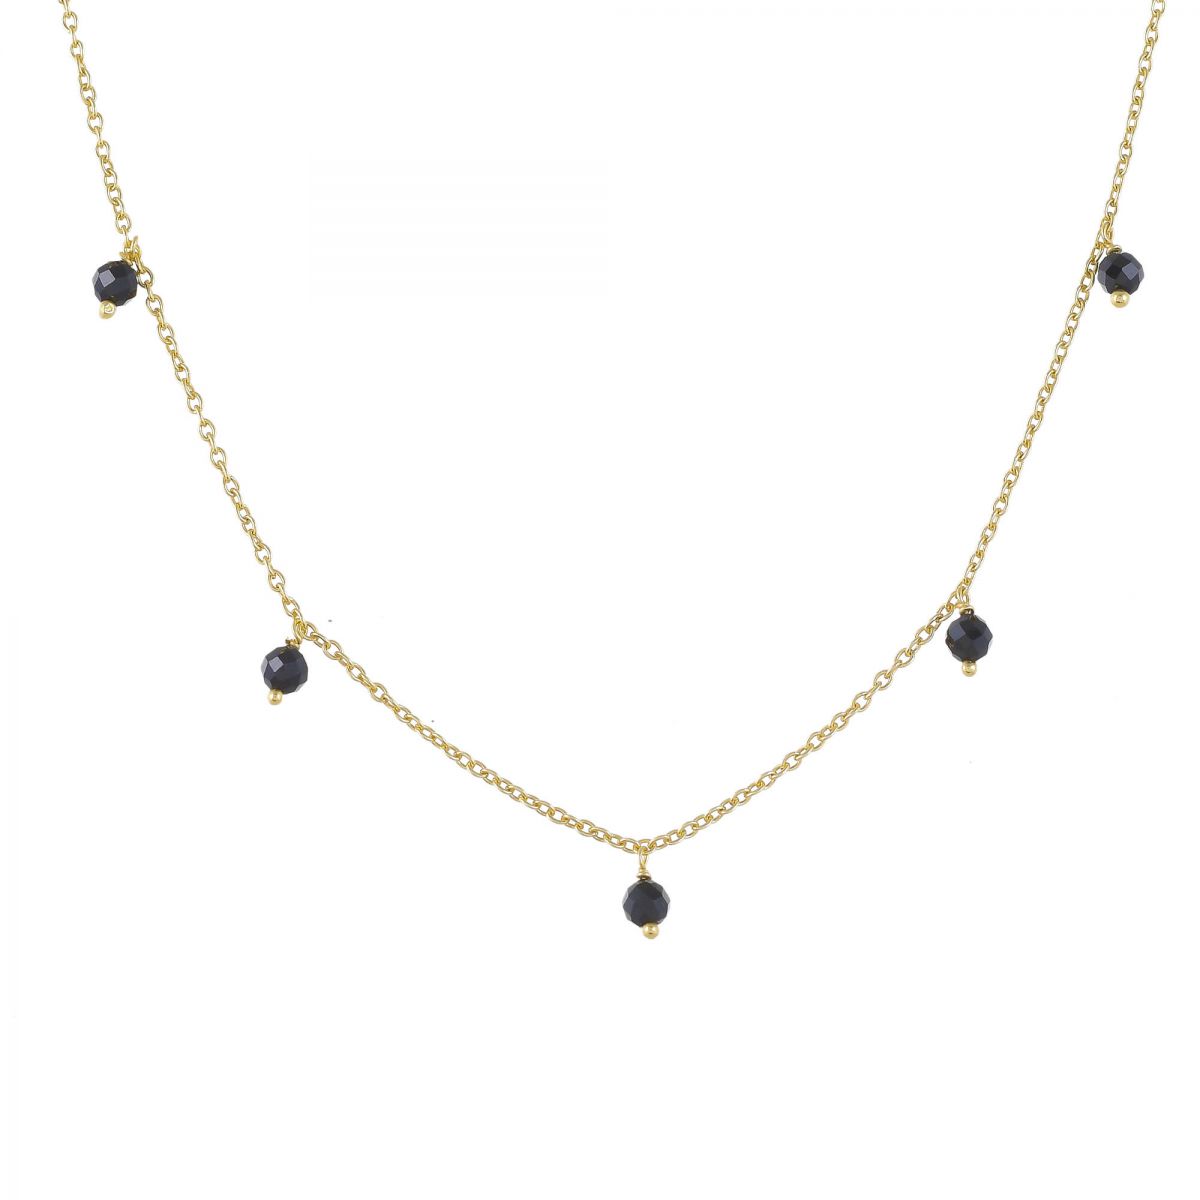 jcollier 3mm black agate beads 45cm gold plated